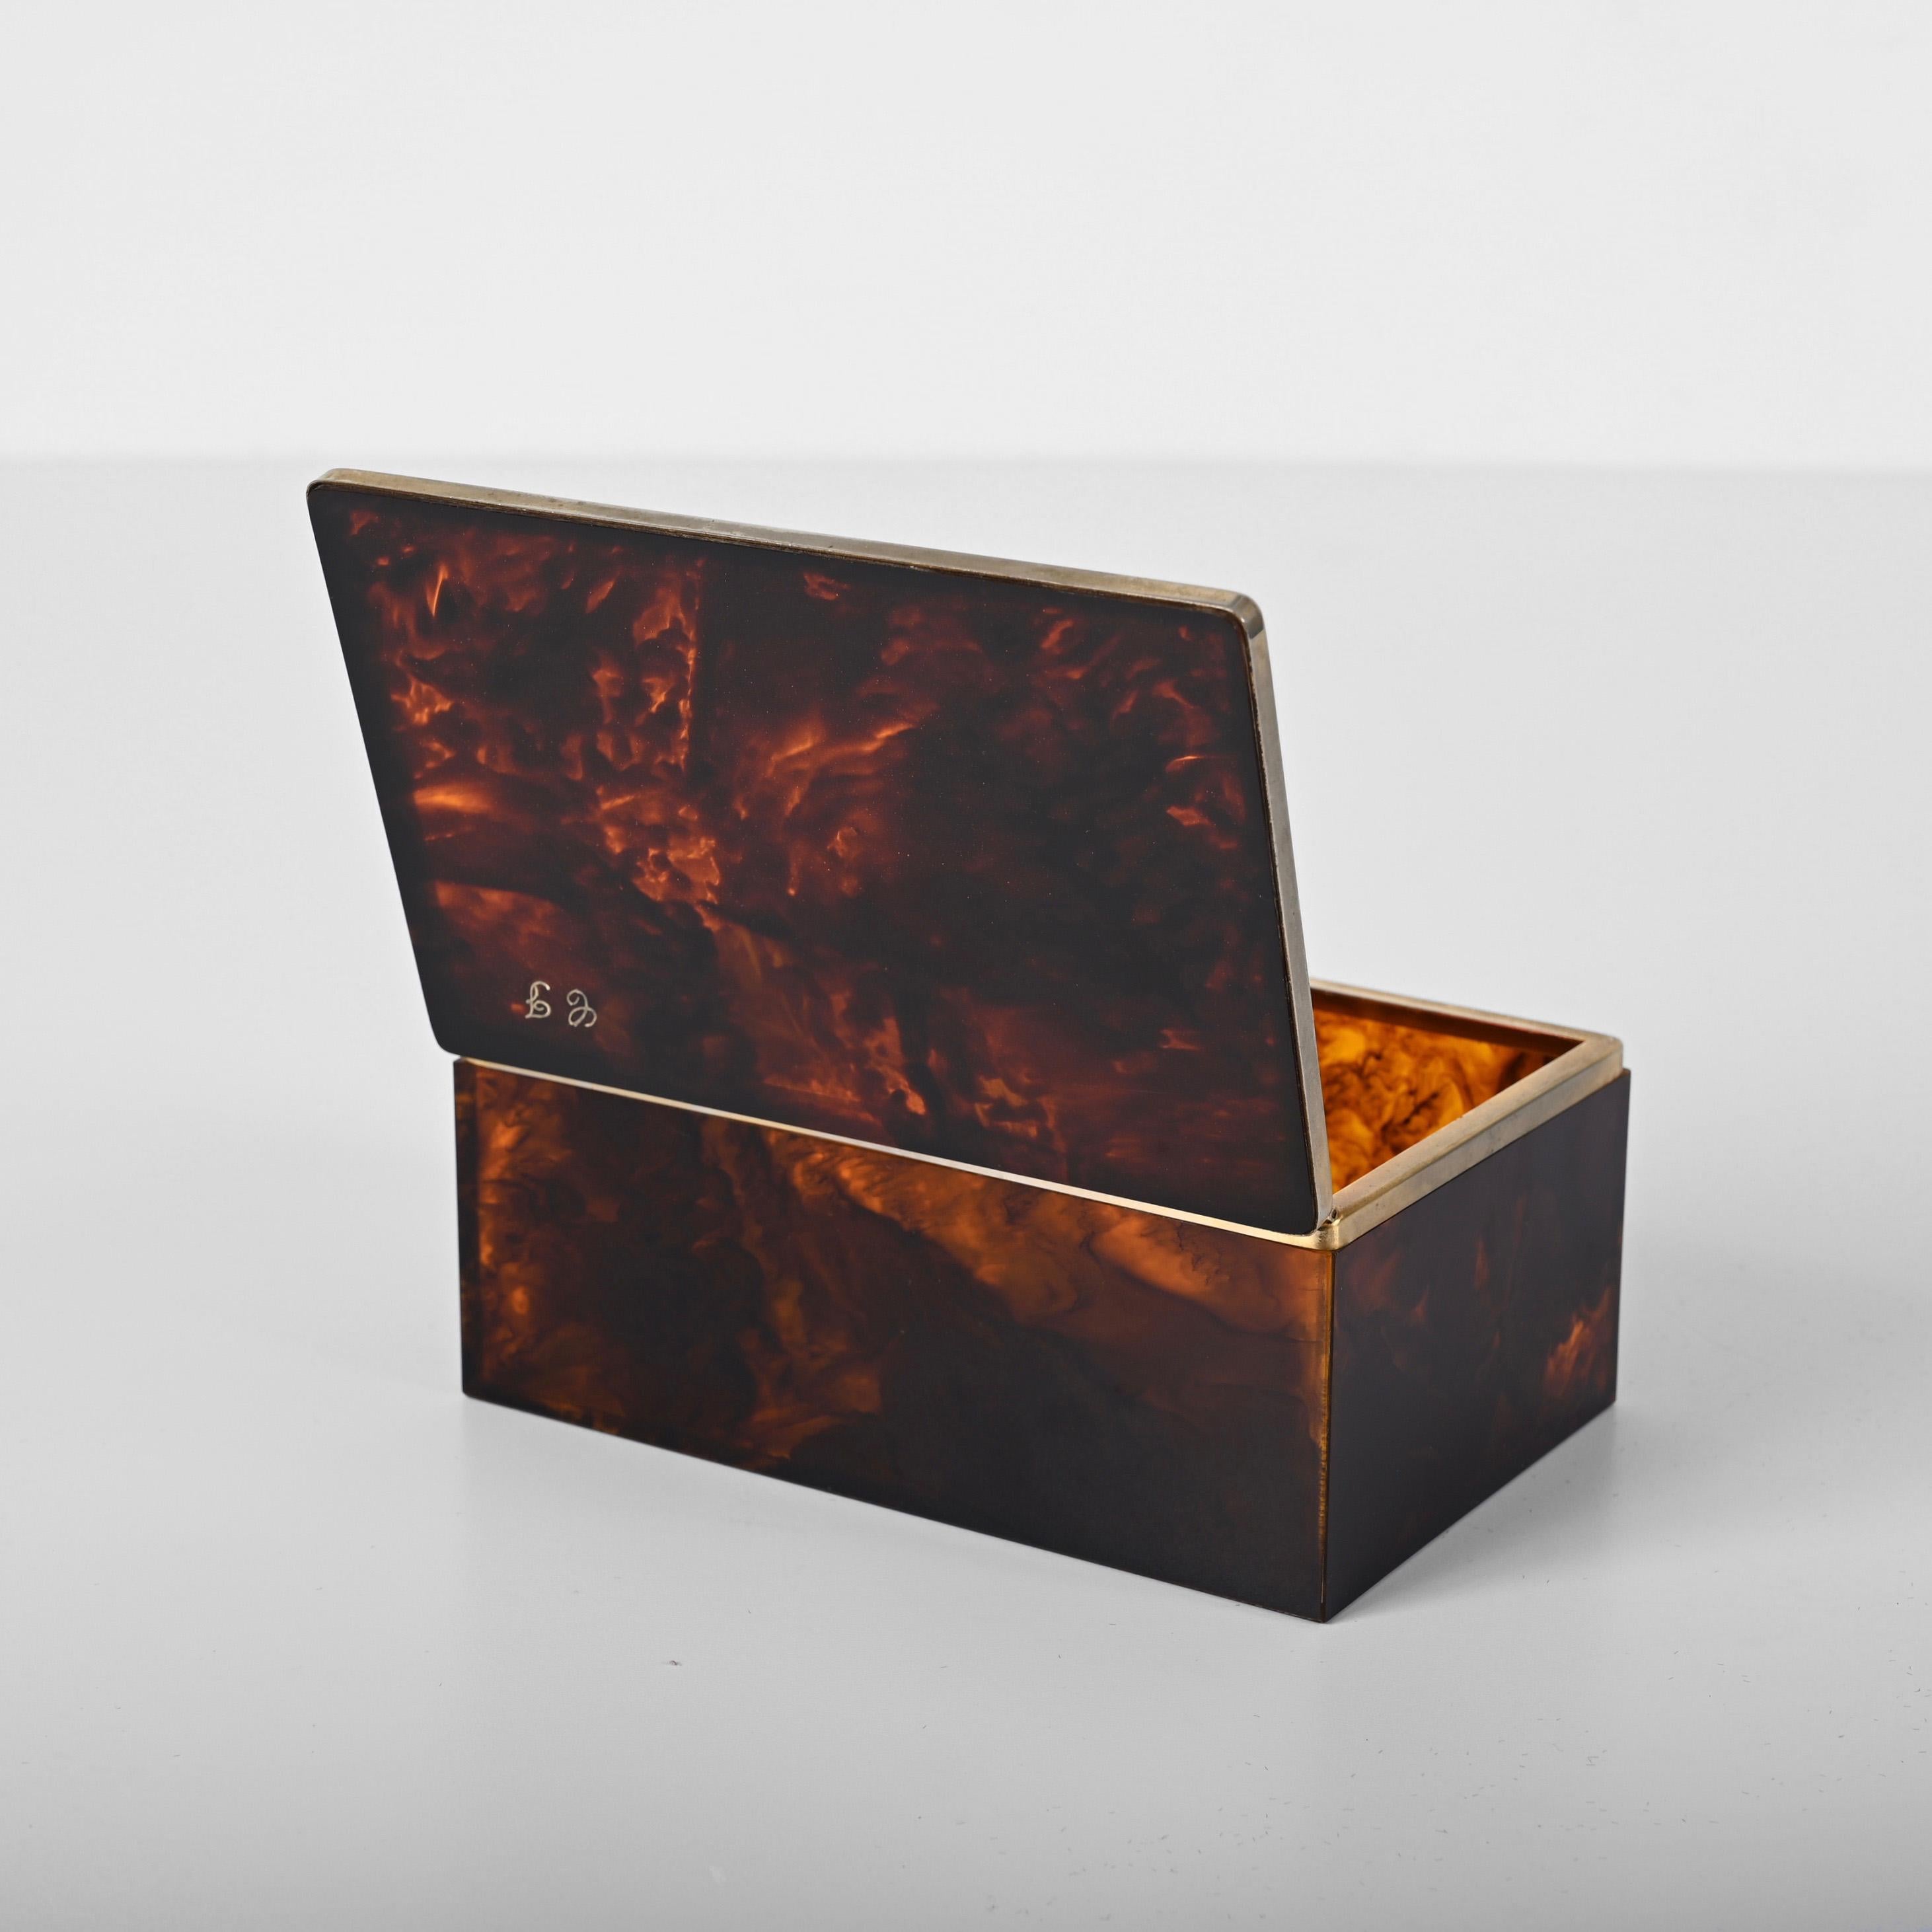 Italian Dior Mid-Century Lucite Tortoiseshell Effect and Brass Jewelry Box, Italy 1970s For Sale